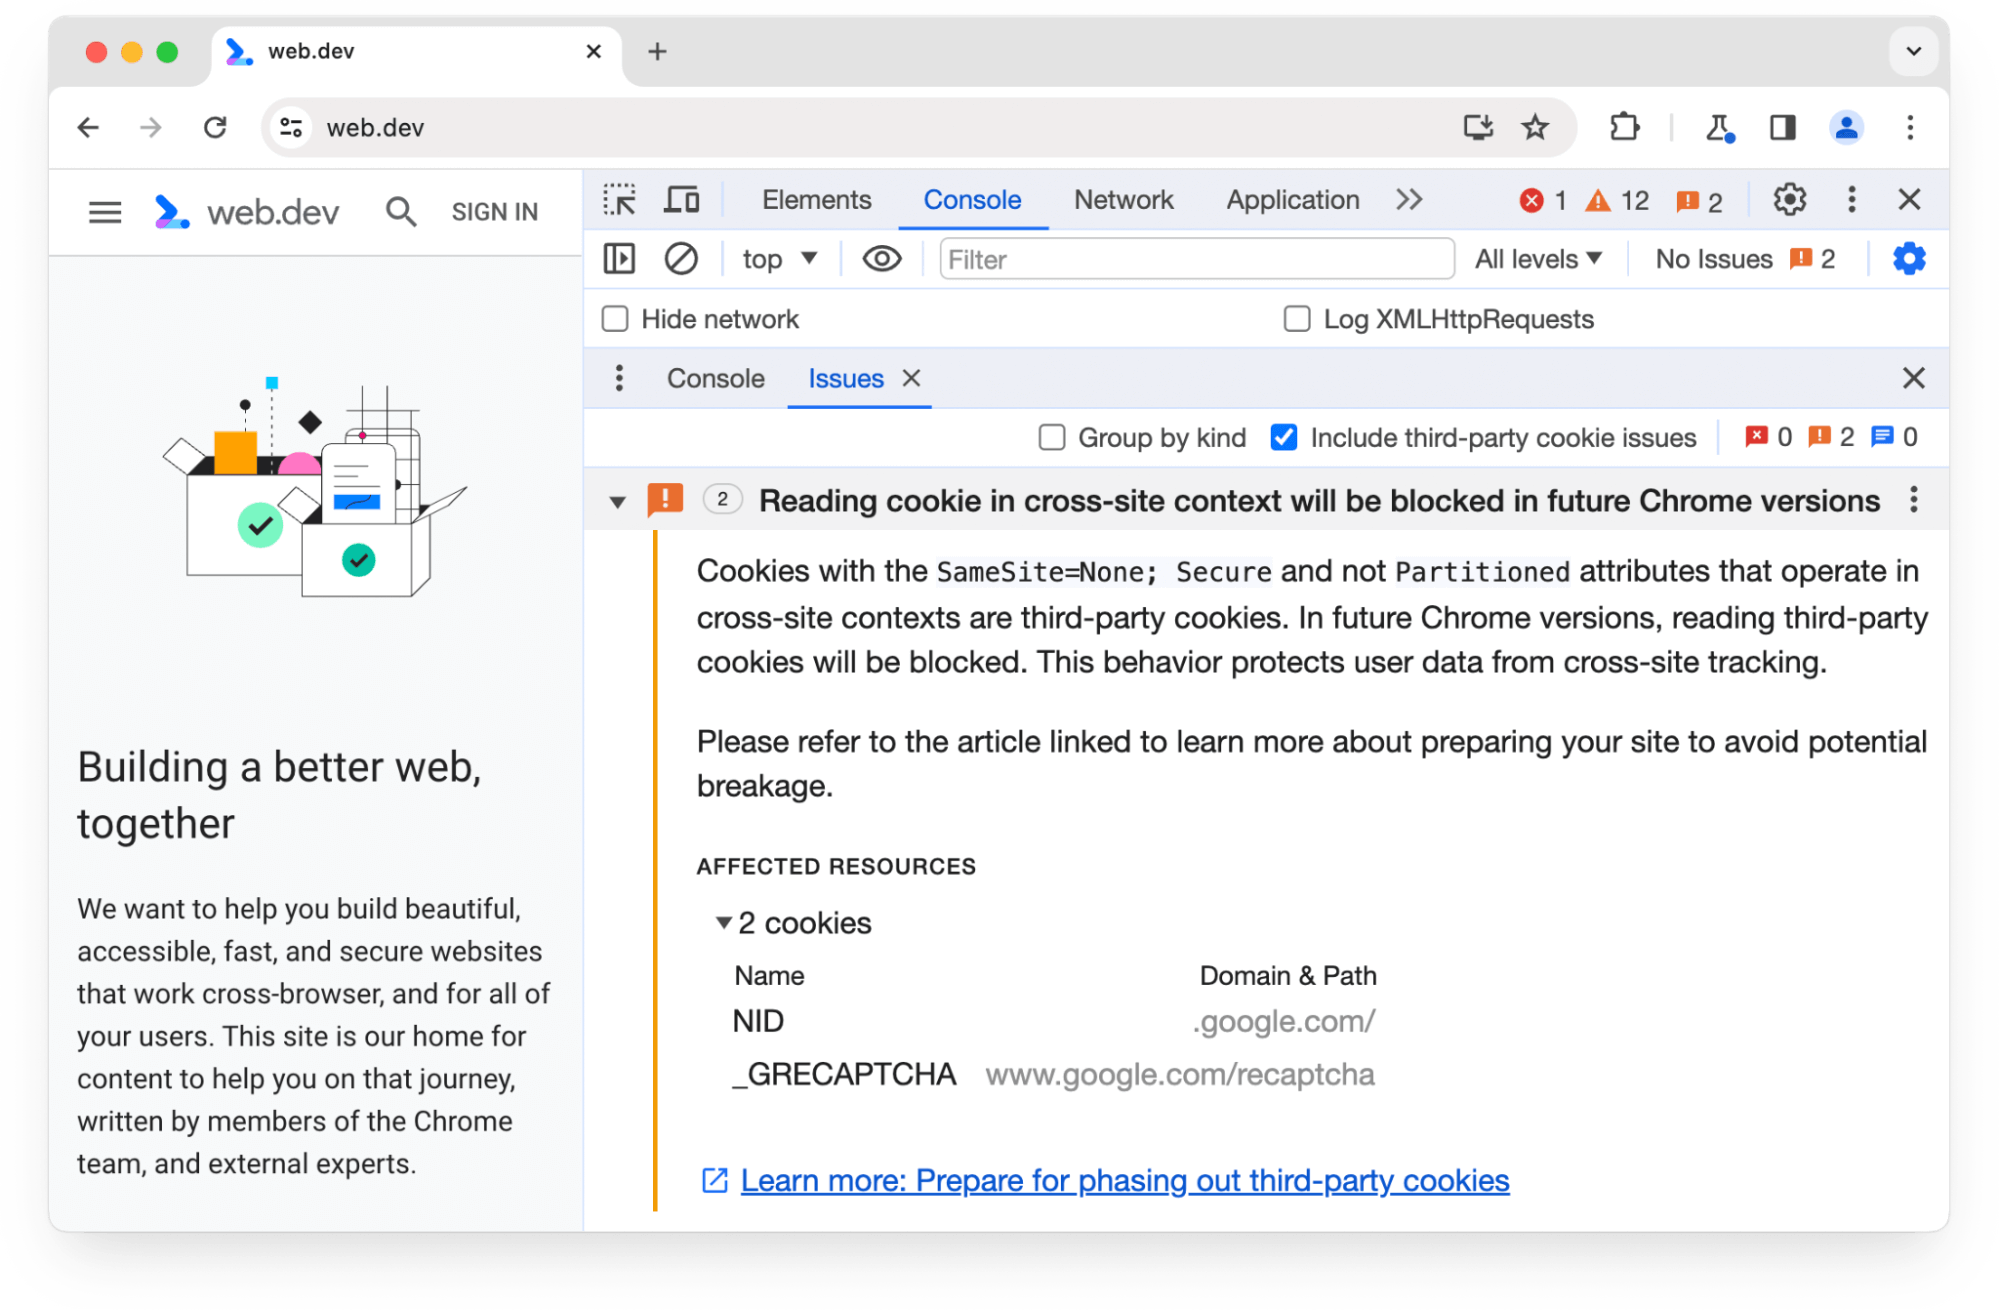 Chrome DevTools Issues panel warning about 2 third-party cookies that will be blocked in future versions of Chrome.